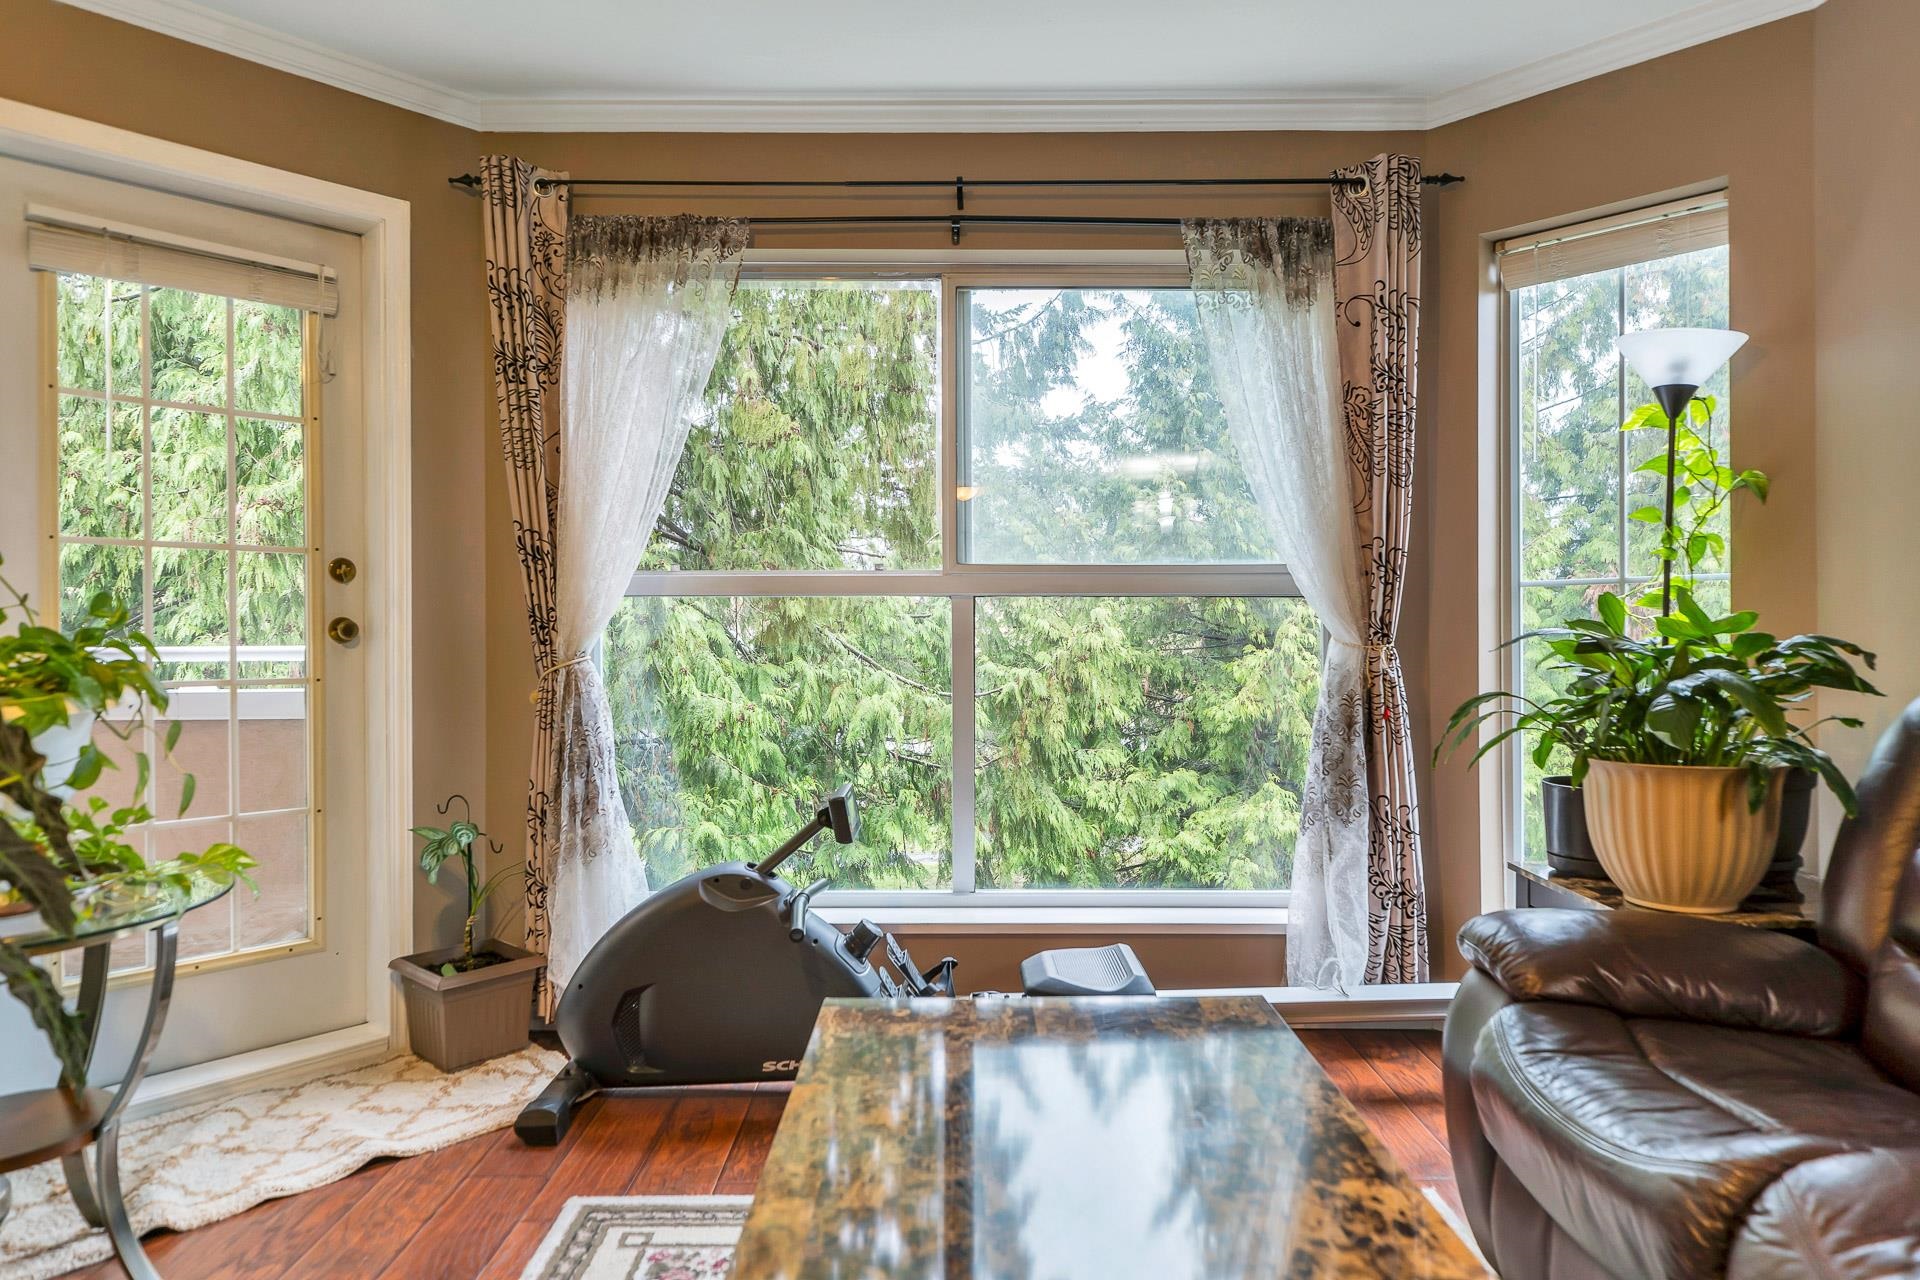 has massive windows that drench the home in natural light